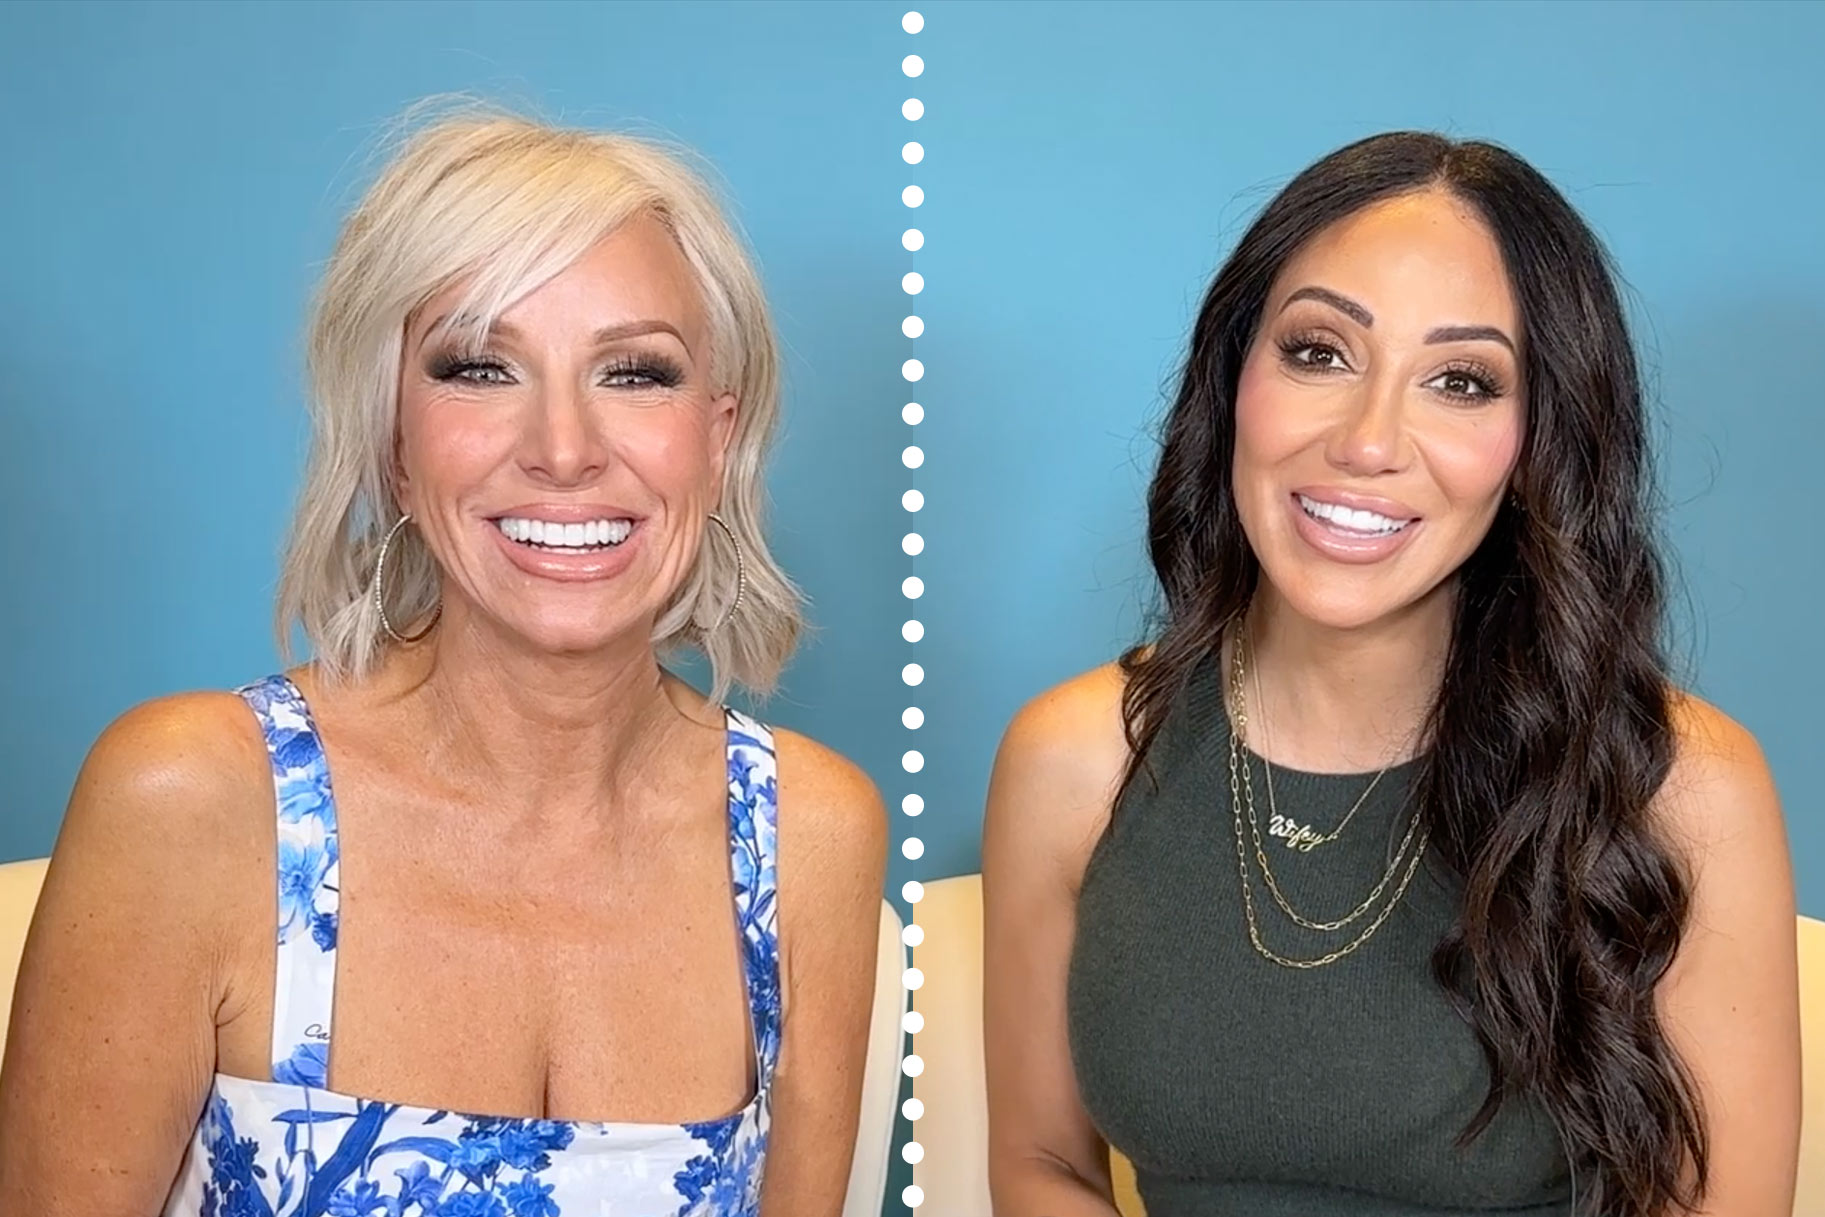 Margaret Josephs and Melissa Gorga of The Real Housewives of New Jersey.